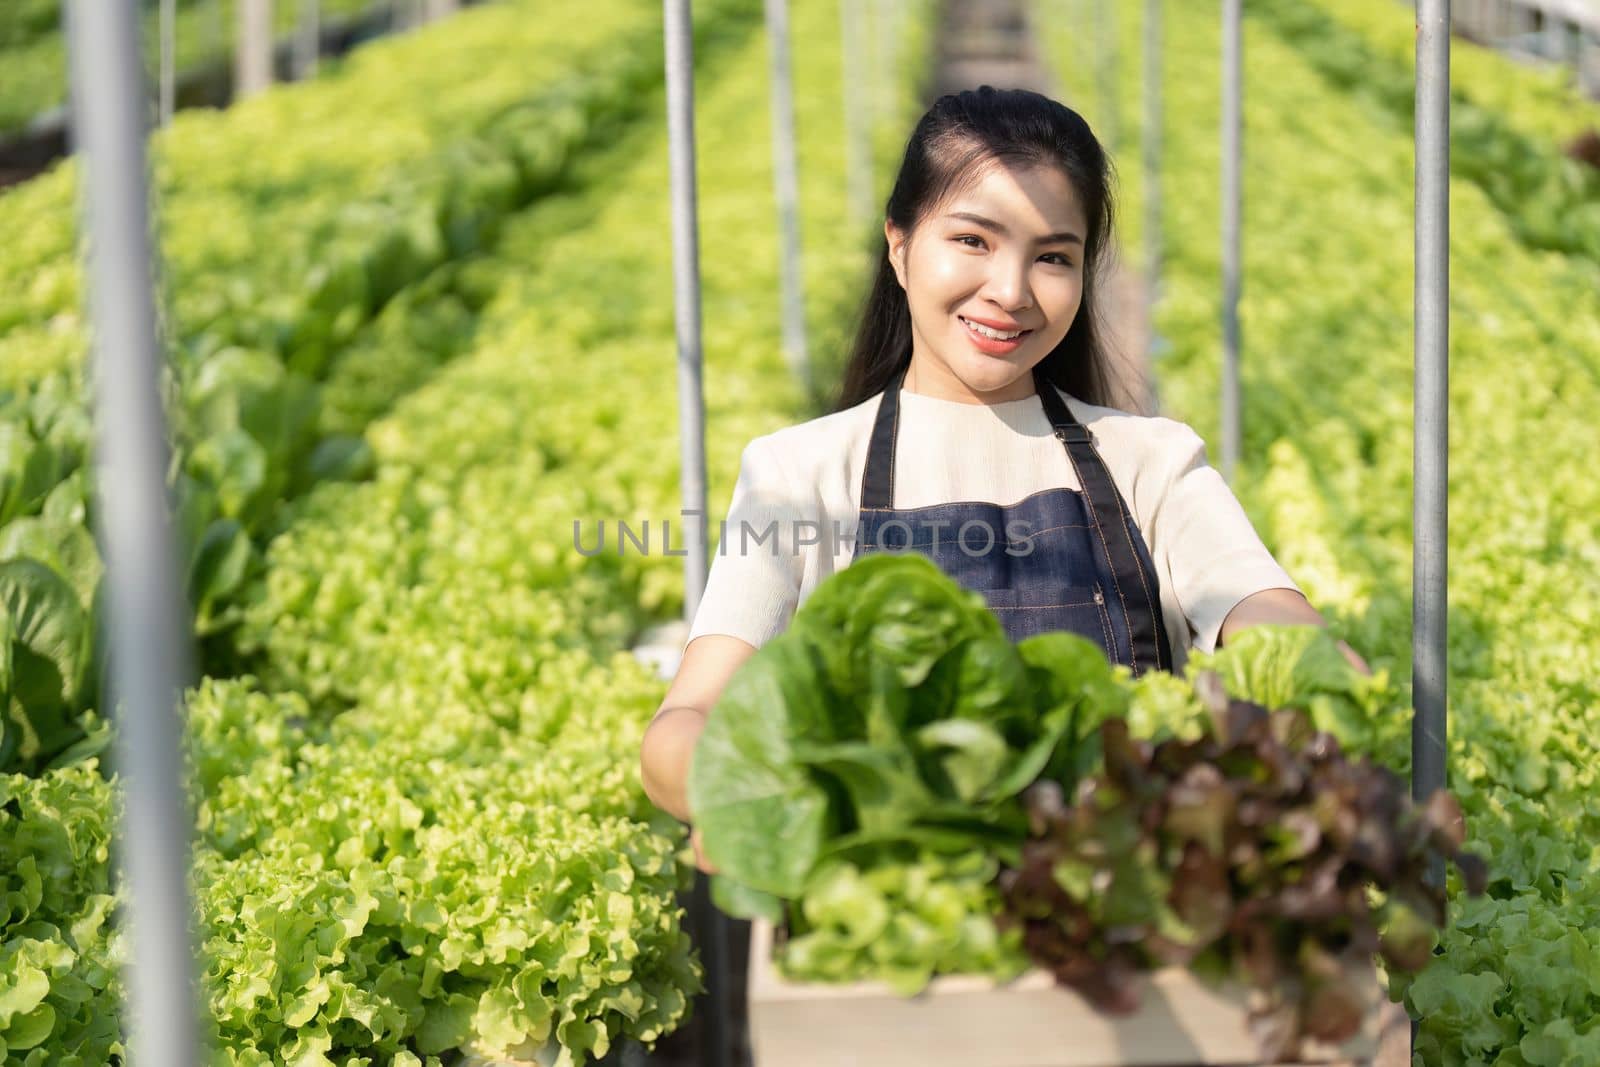 Asian women grow hydroponics vegetables in greenhouses. Inspecting the quality of agricultural produce. Modern farming concepts using modern technology.